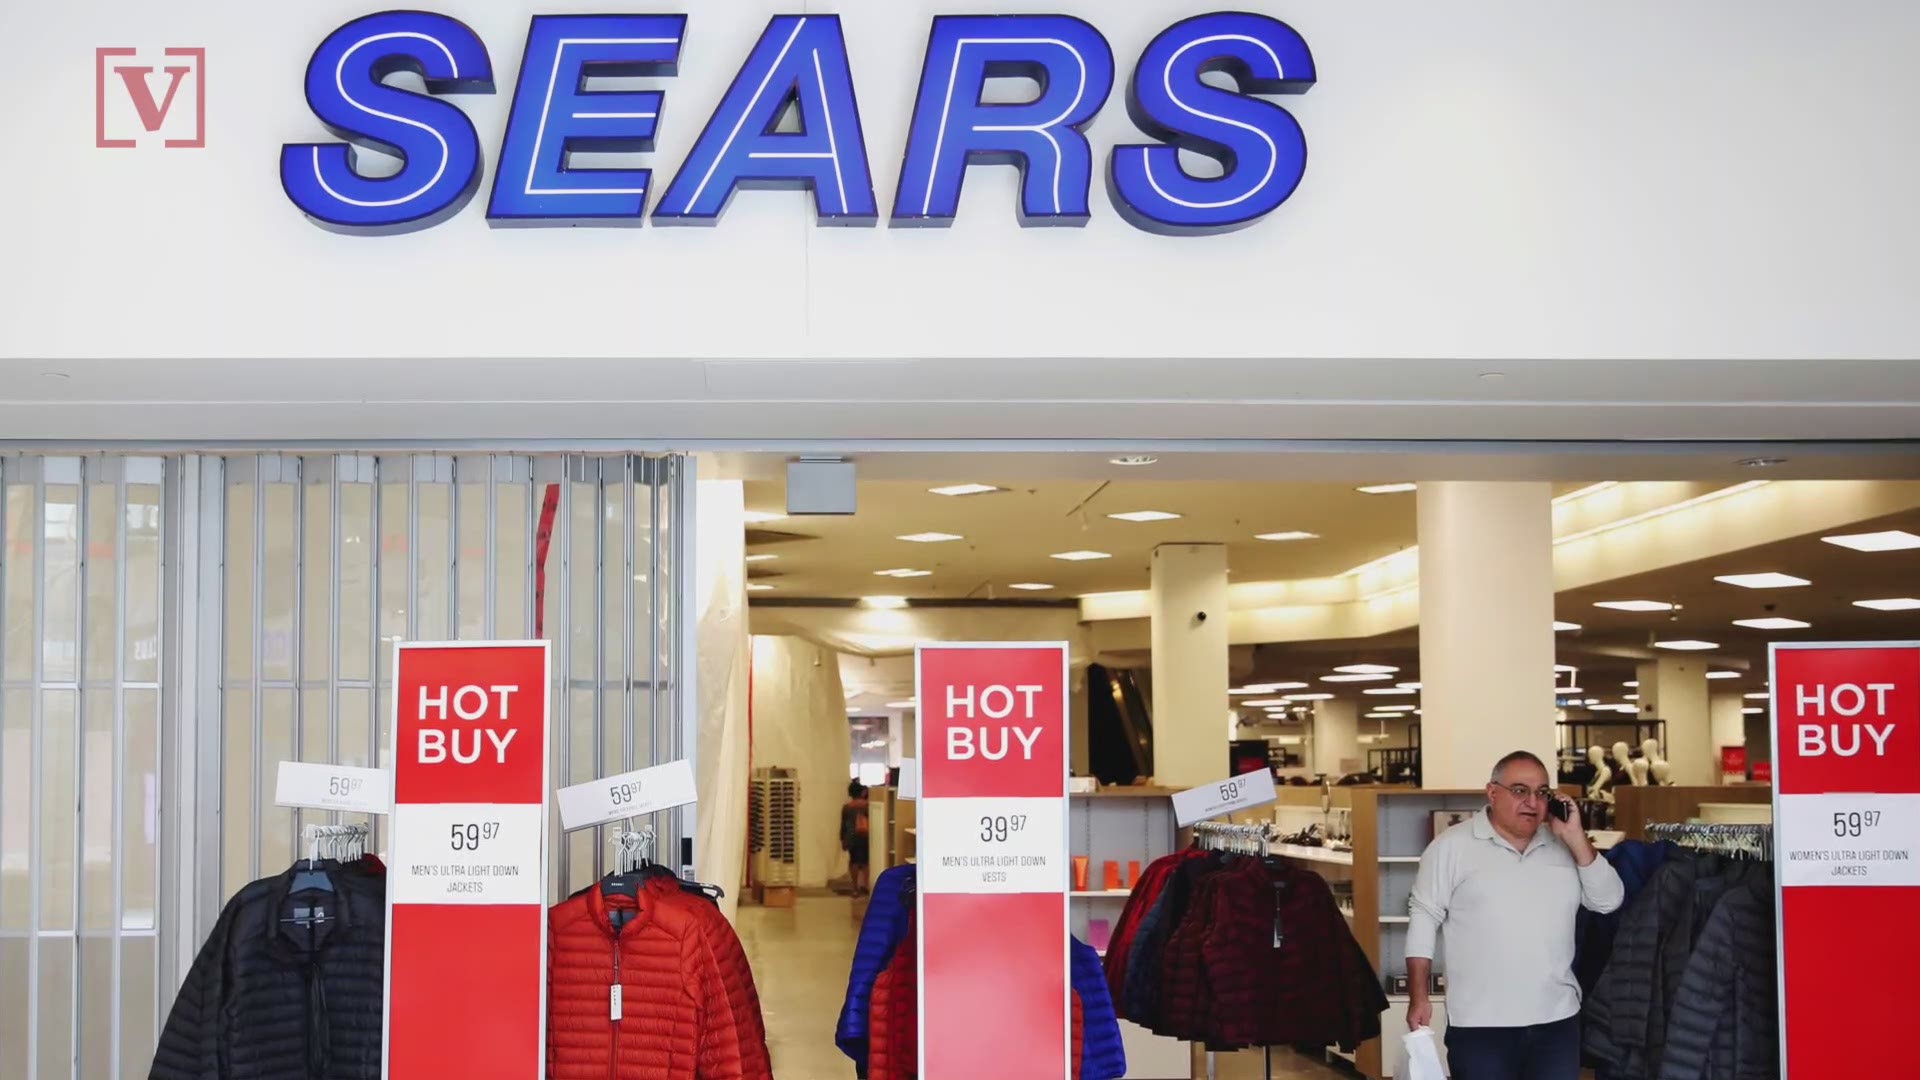 Sears will be auctioning 16 of its stores as the company struggles to stay afloat.Veuer's Maria Mercedes Galuppo has more.